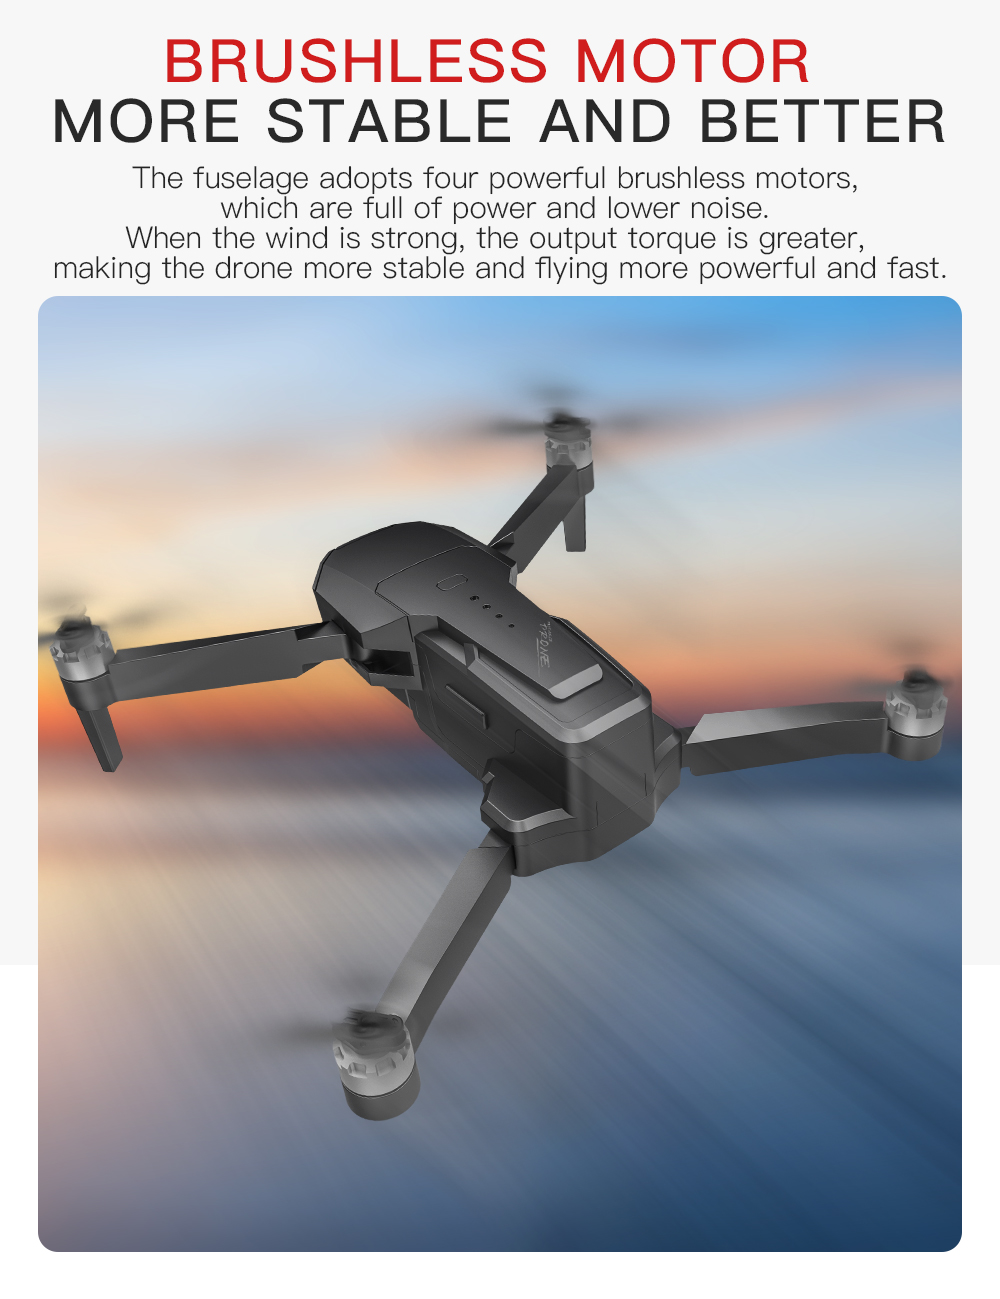 KF107-GPS-5G-WiFi-12KM-FPV-with-4K-Servo-Camera-Optical-Flow-Positioning-Brushless-Foldable-RC-Drone-1740852-18